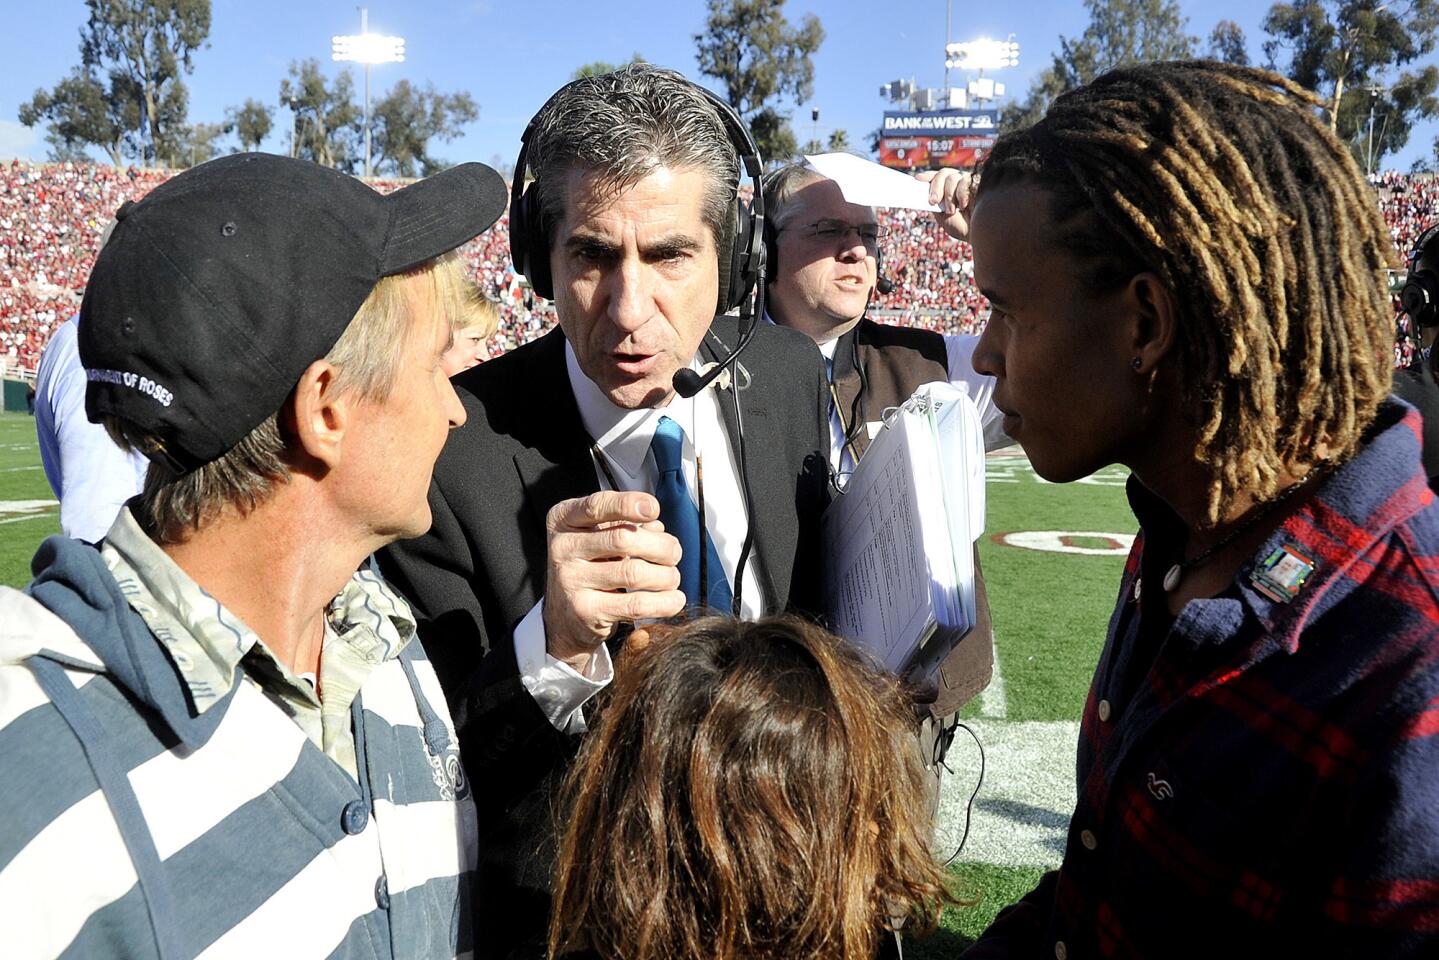 Game manager Ted Tompkins instructs friends of Jane Goodall about what they will be doing at the 99th Rose Bowl in Pasadena on Tuesday, January 1, 2013.